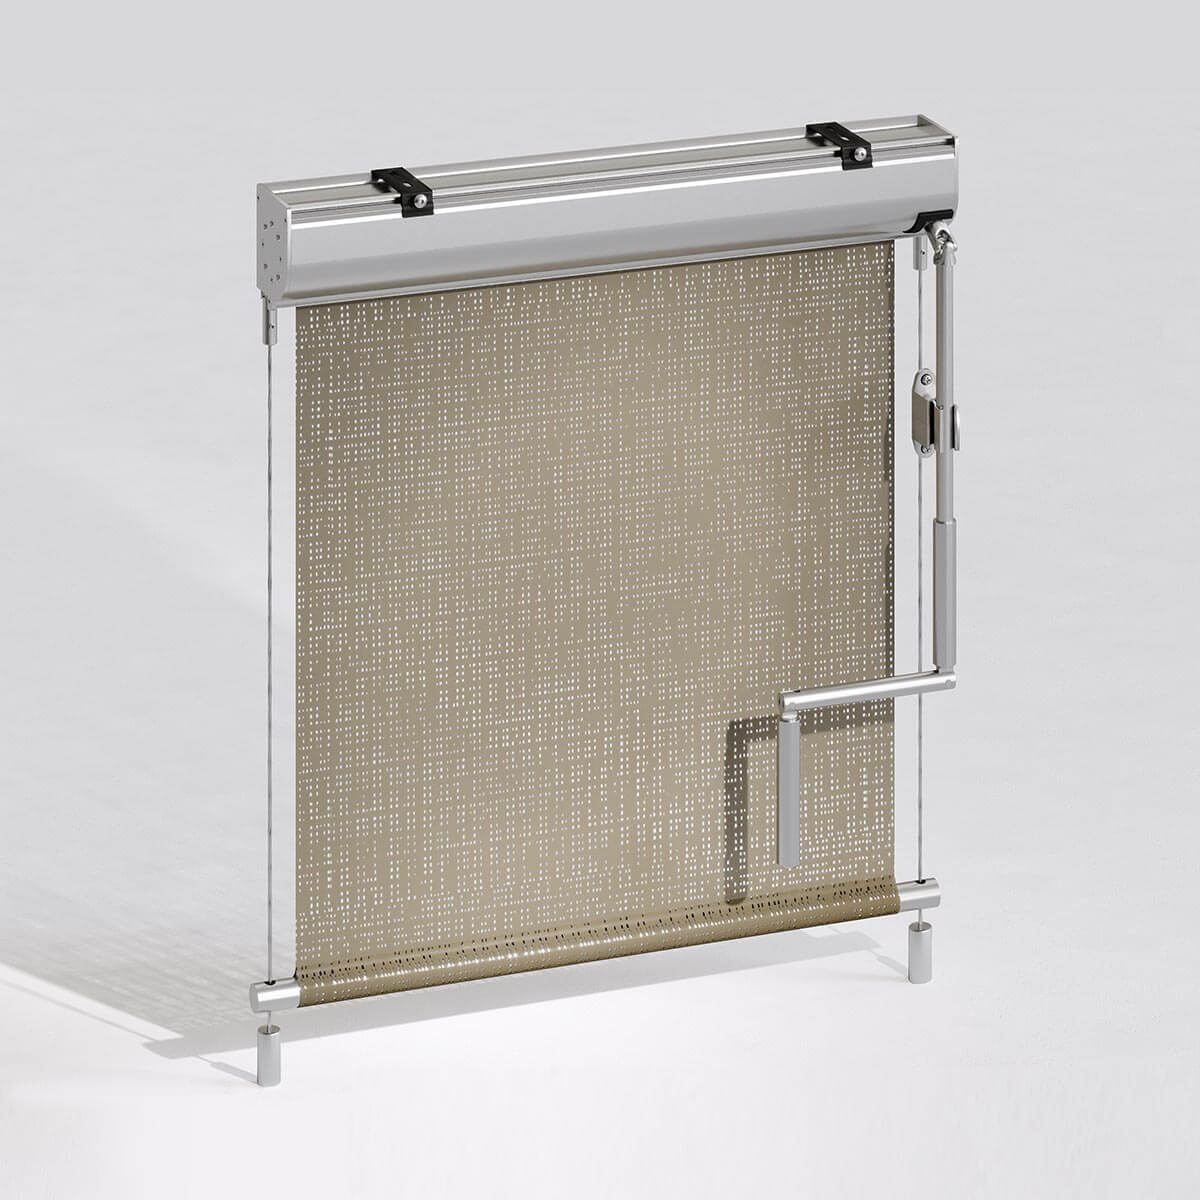 Winch-operated 65 roller blind, Tondo 65, Guide wires. Pronema